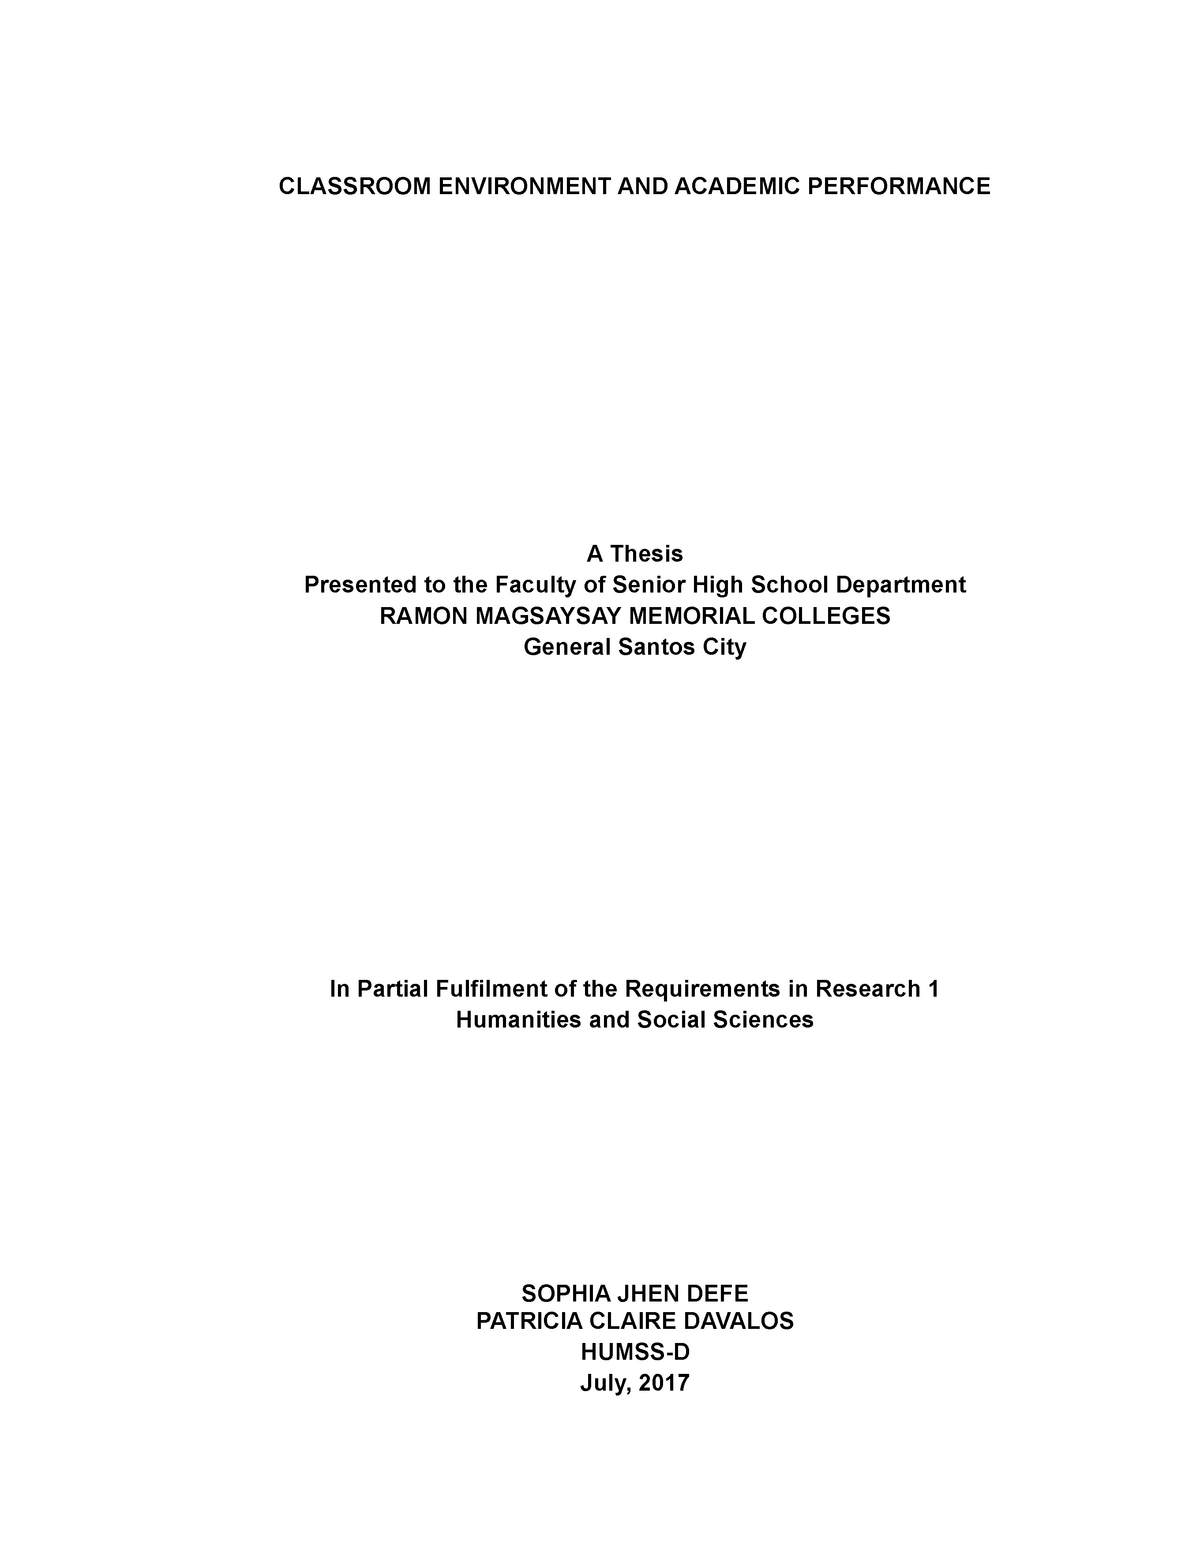 thesis on school environment and academic performance